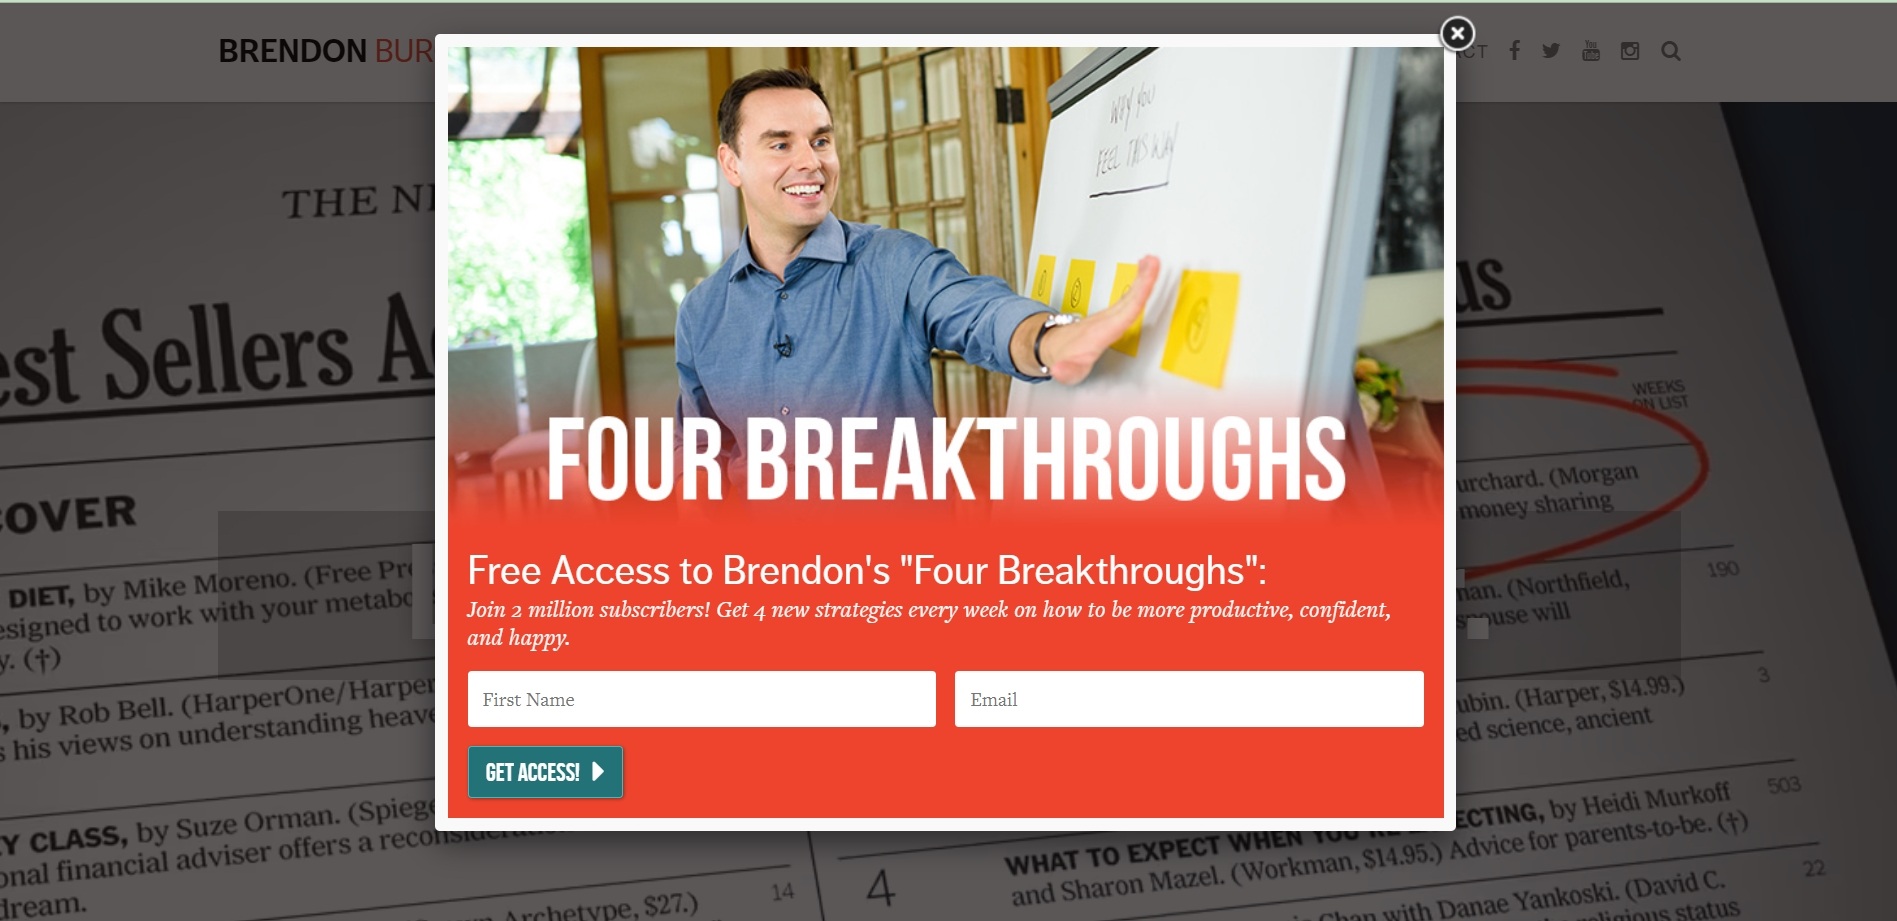 Brendon offers ‘four breakthroughs’ to encourage visitors to drop their email and sign up